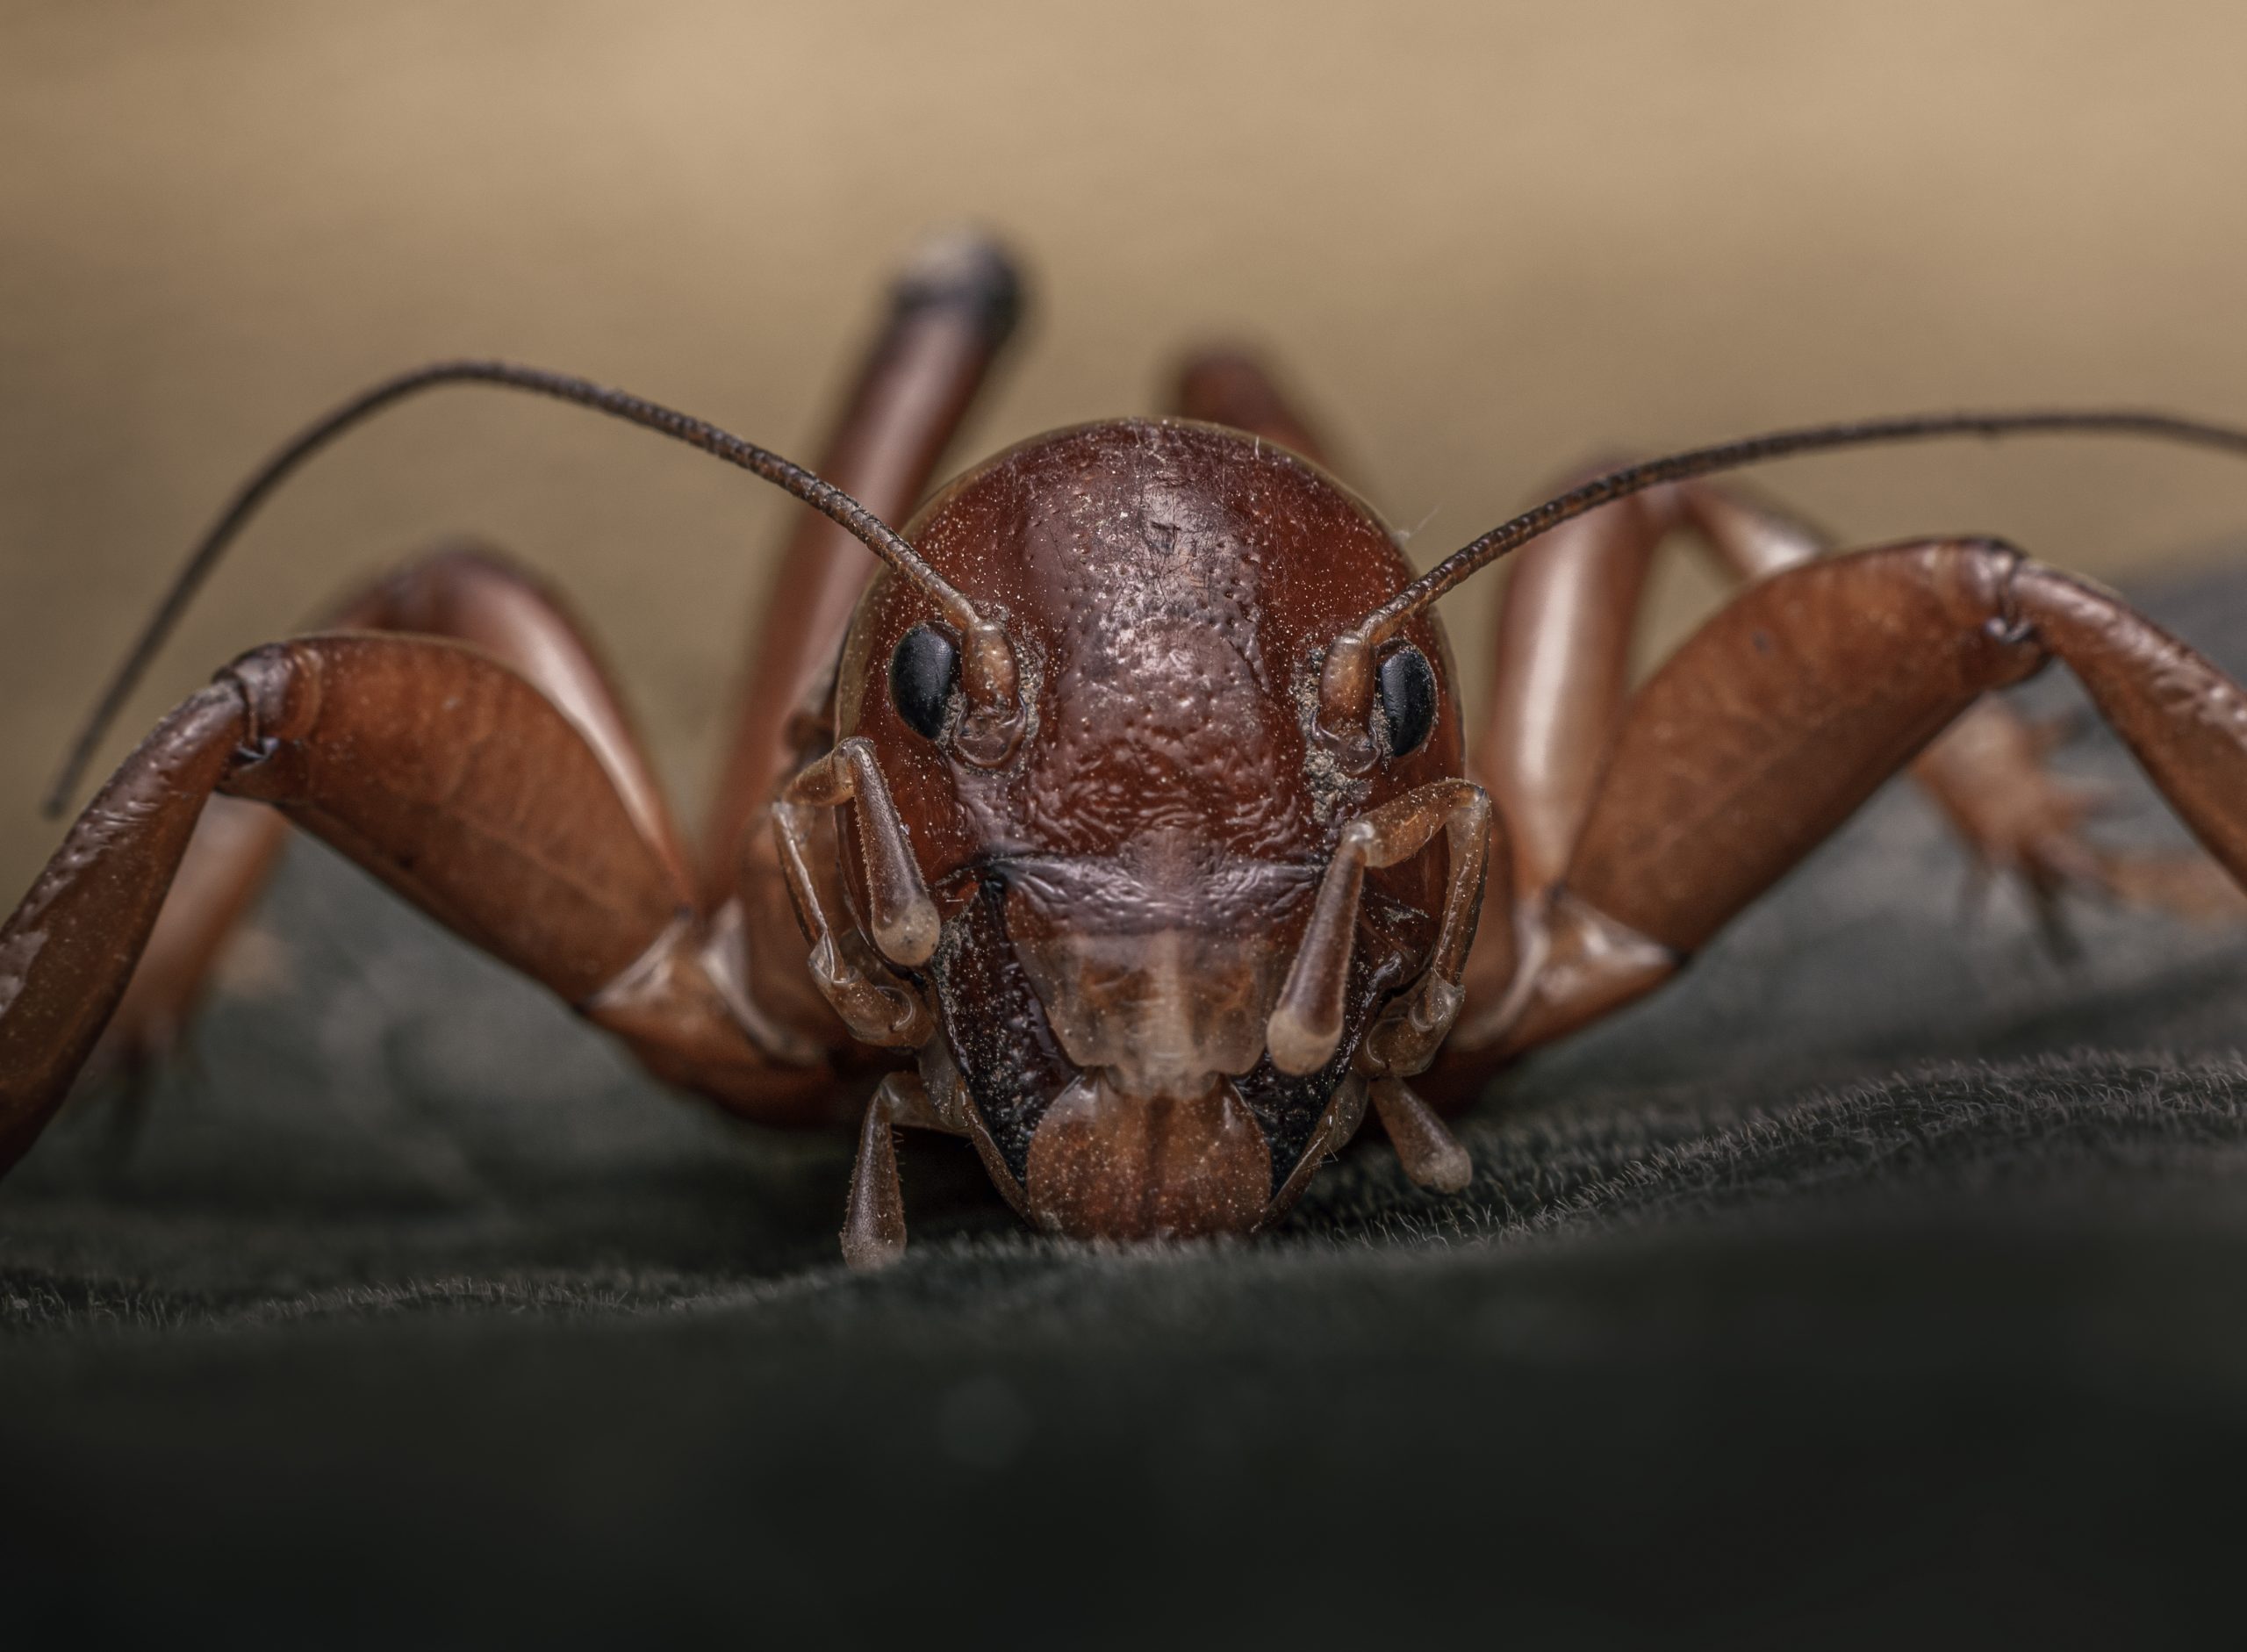 Crickets can be scary looking